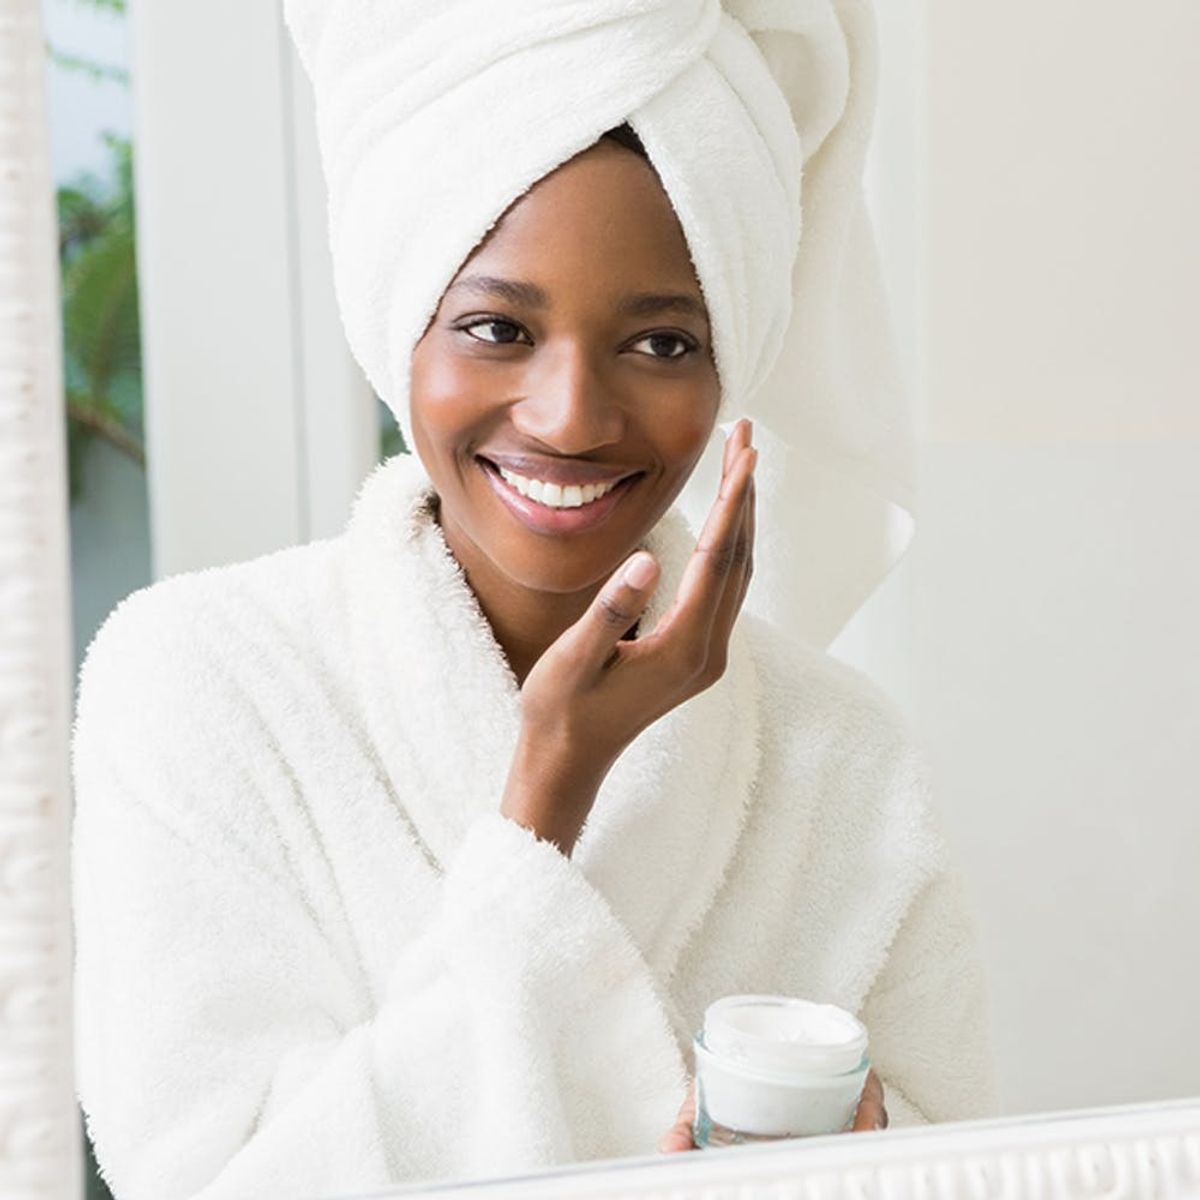 The Most Important Ingredients to Tackle 4 Common Skin Concerns